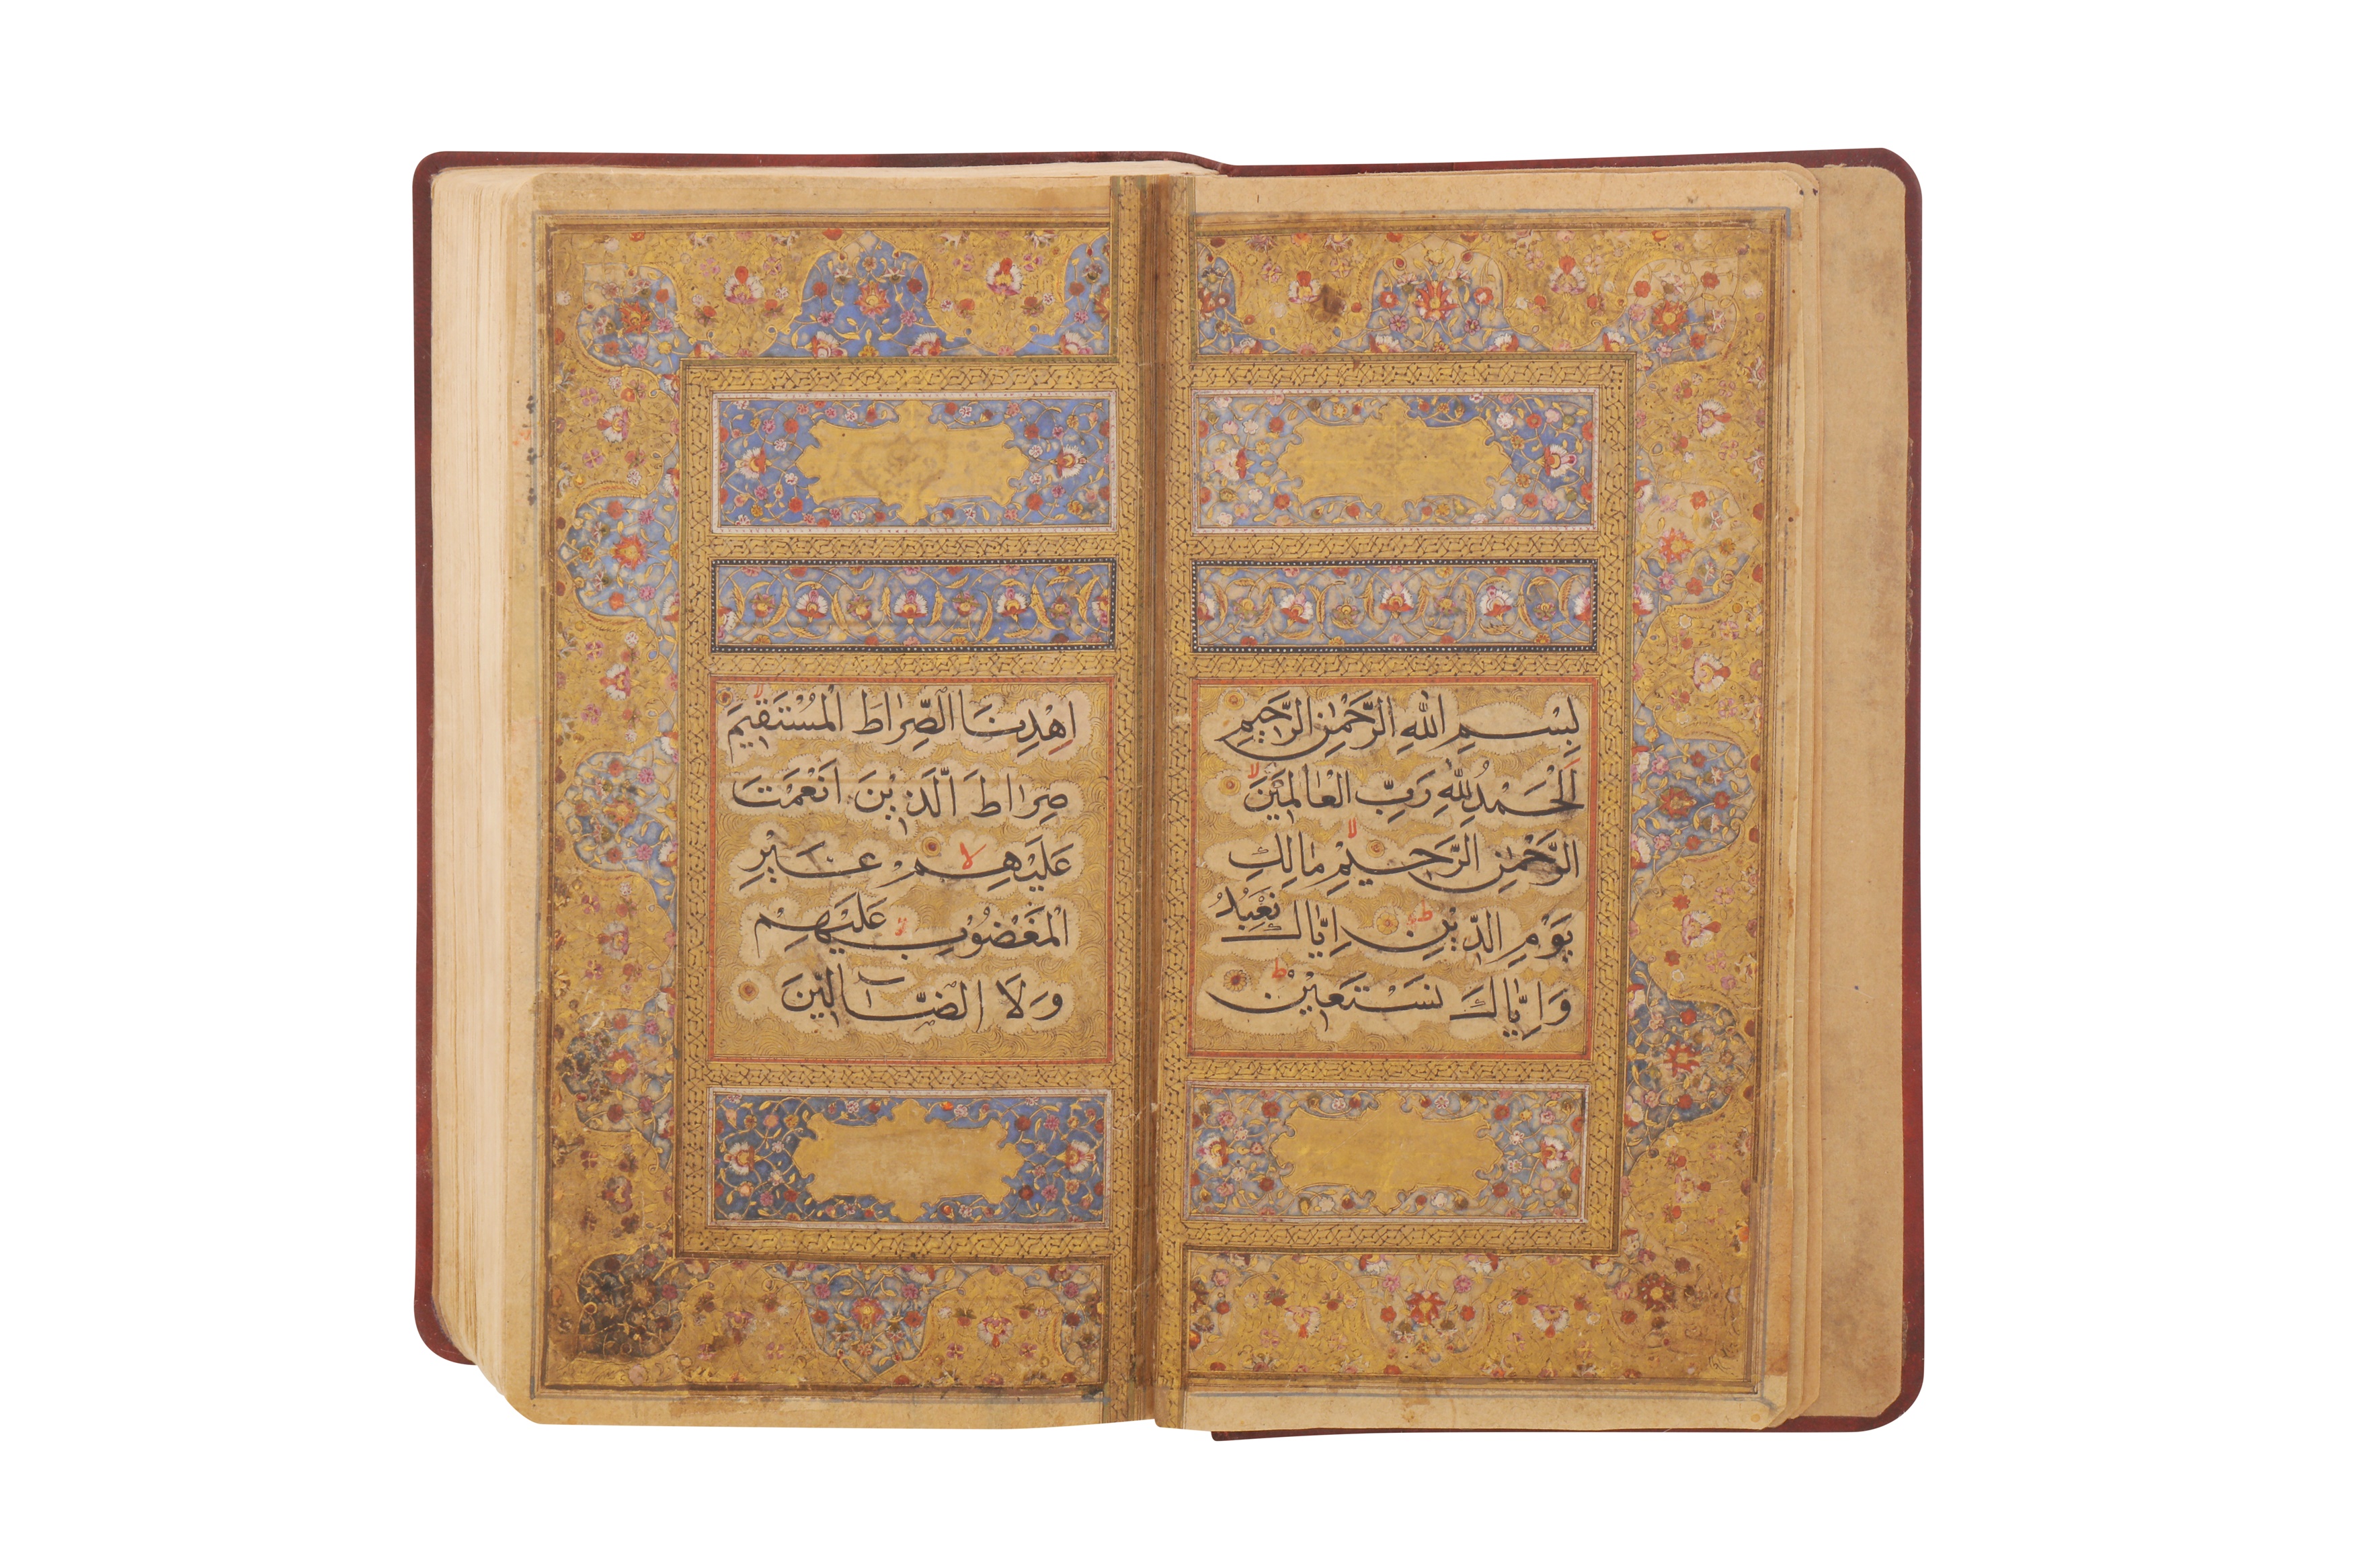 AN ILLUMINATED QUR'AN, INDIA, POSSIBLY 18TH CENTURY Kashmir, North India, probably late 18th centur